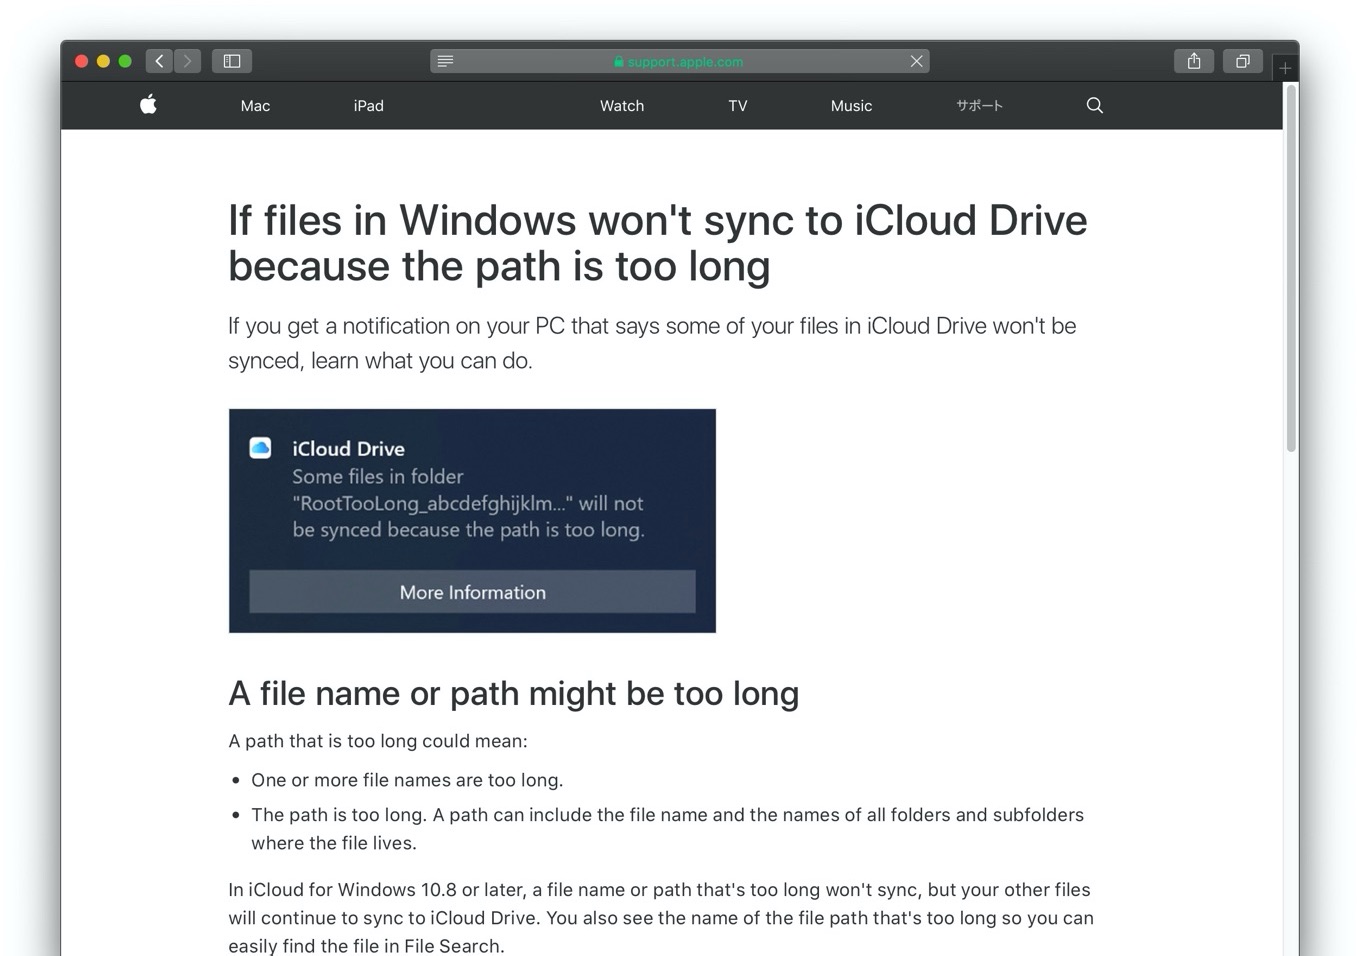 If files in Windows won't sync to iCloud Drive because the path is too long